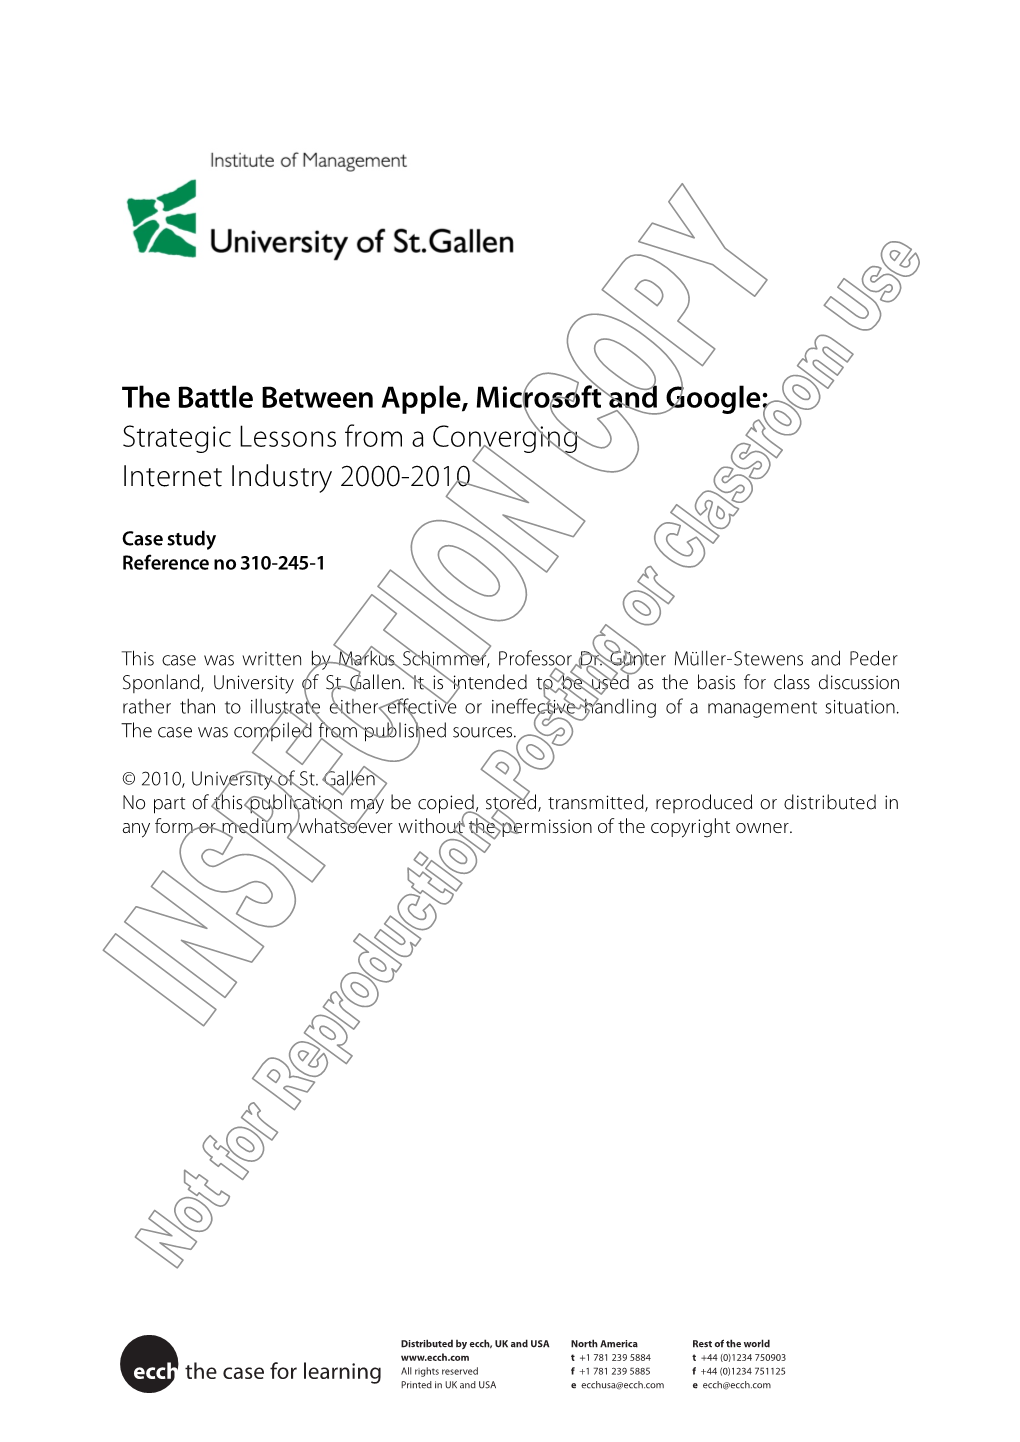 The Battle Between Apple, Microsoft and Google: Strategic Lessons from a Converging Internet Industry 2000-2010